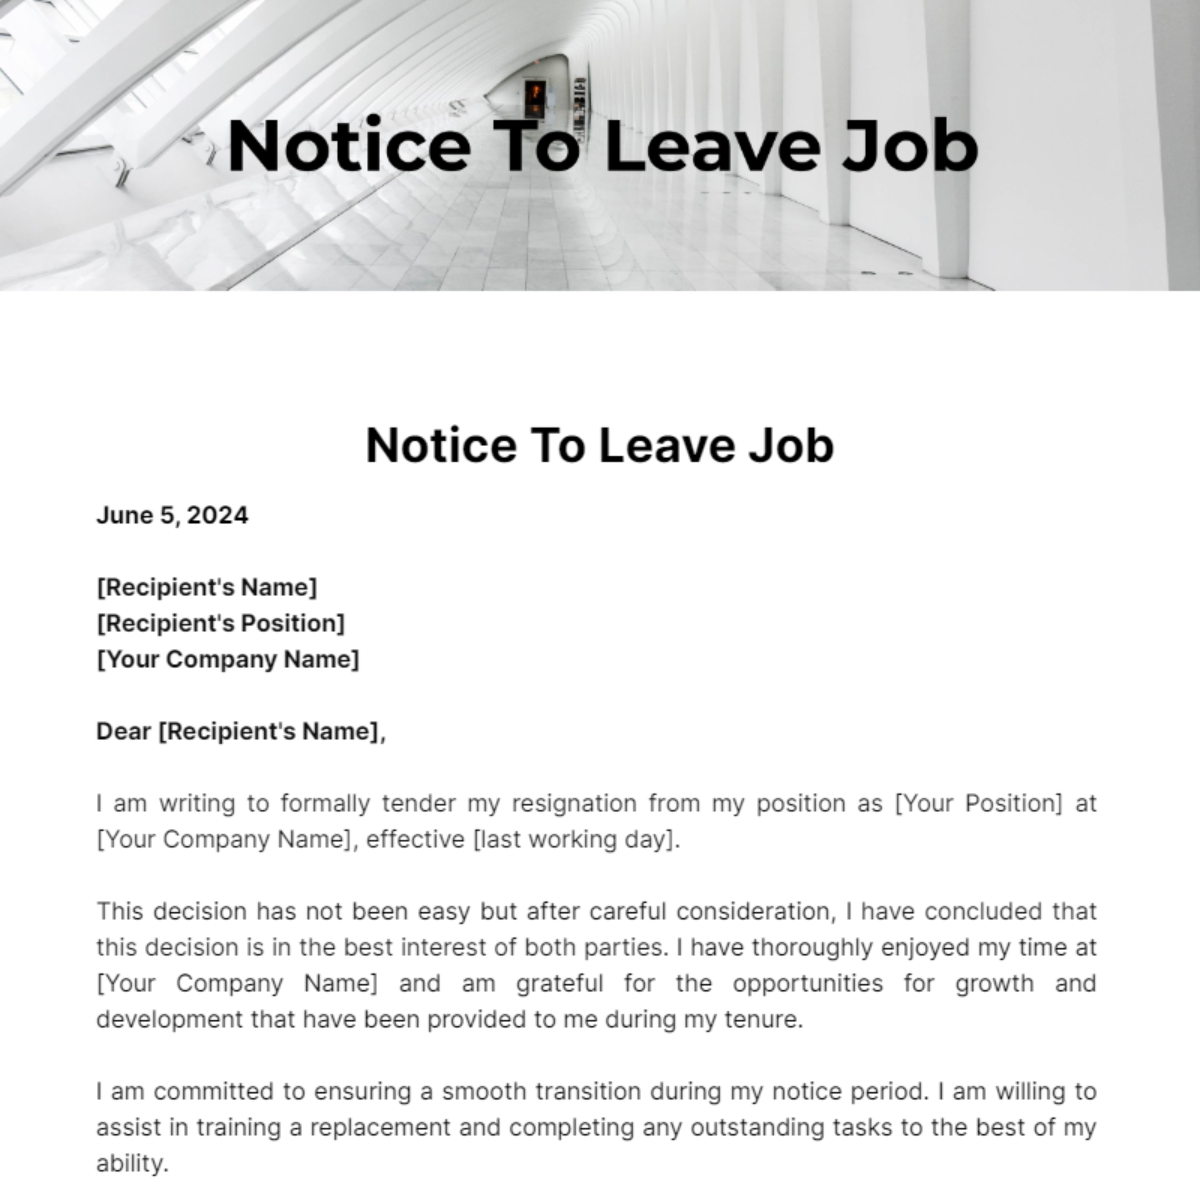 Notice To Leave Job Template